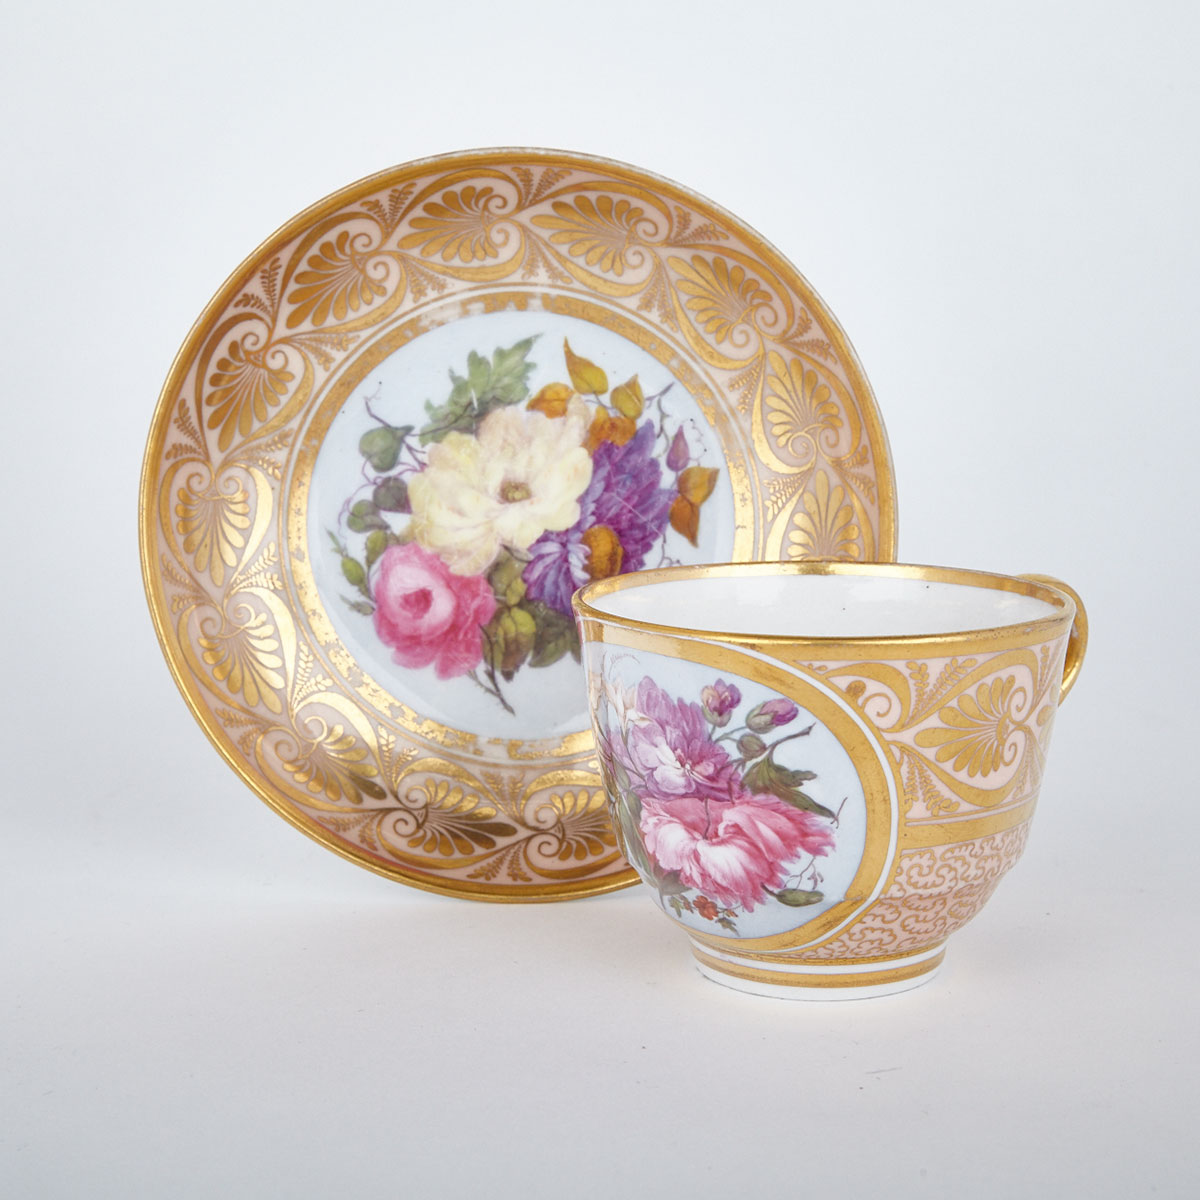 Barr, Flight and Barr Worcester Salmon Ground Teacup and Saucer, c.1810